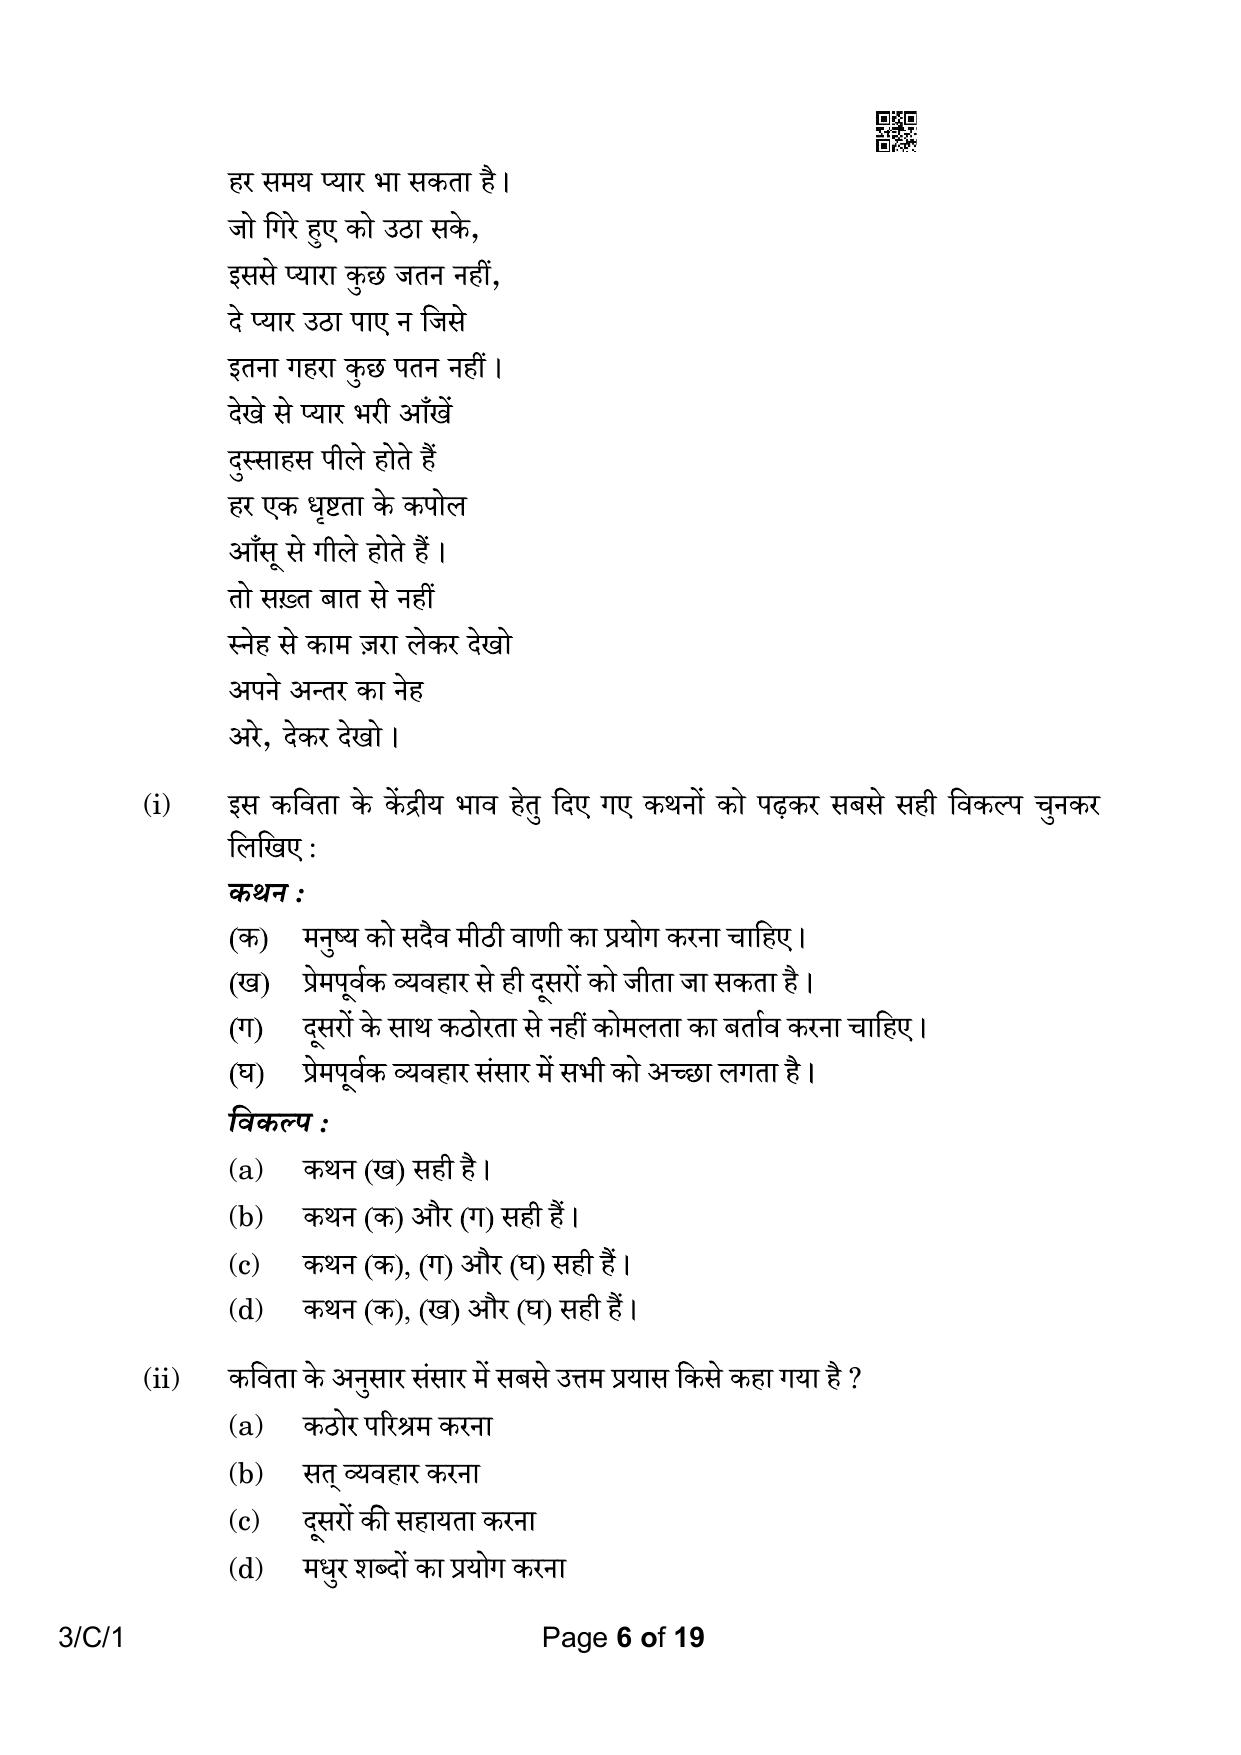 CBSE Class 10 3-1 Hindi A 2023 (Compartment) Question Paper - Page 6